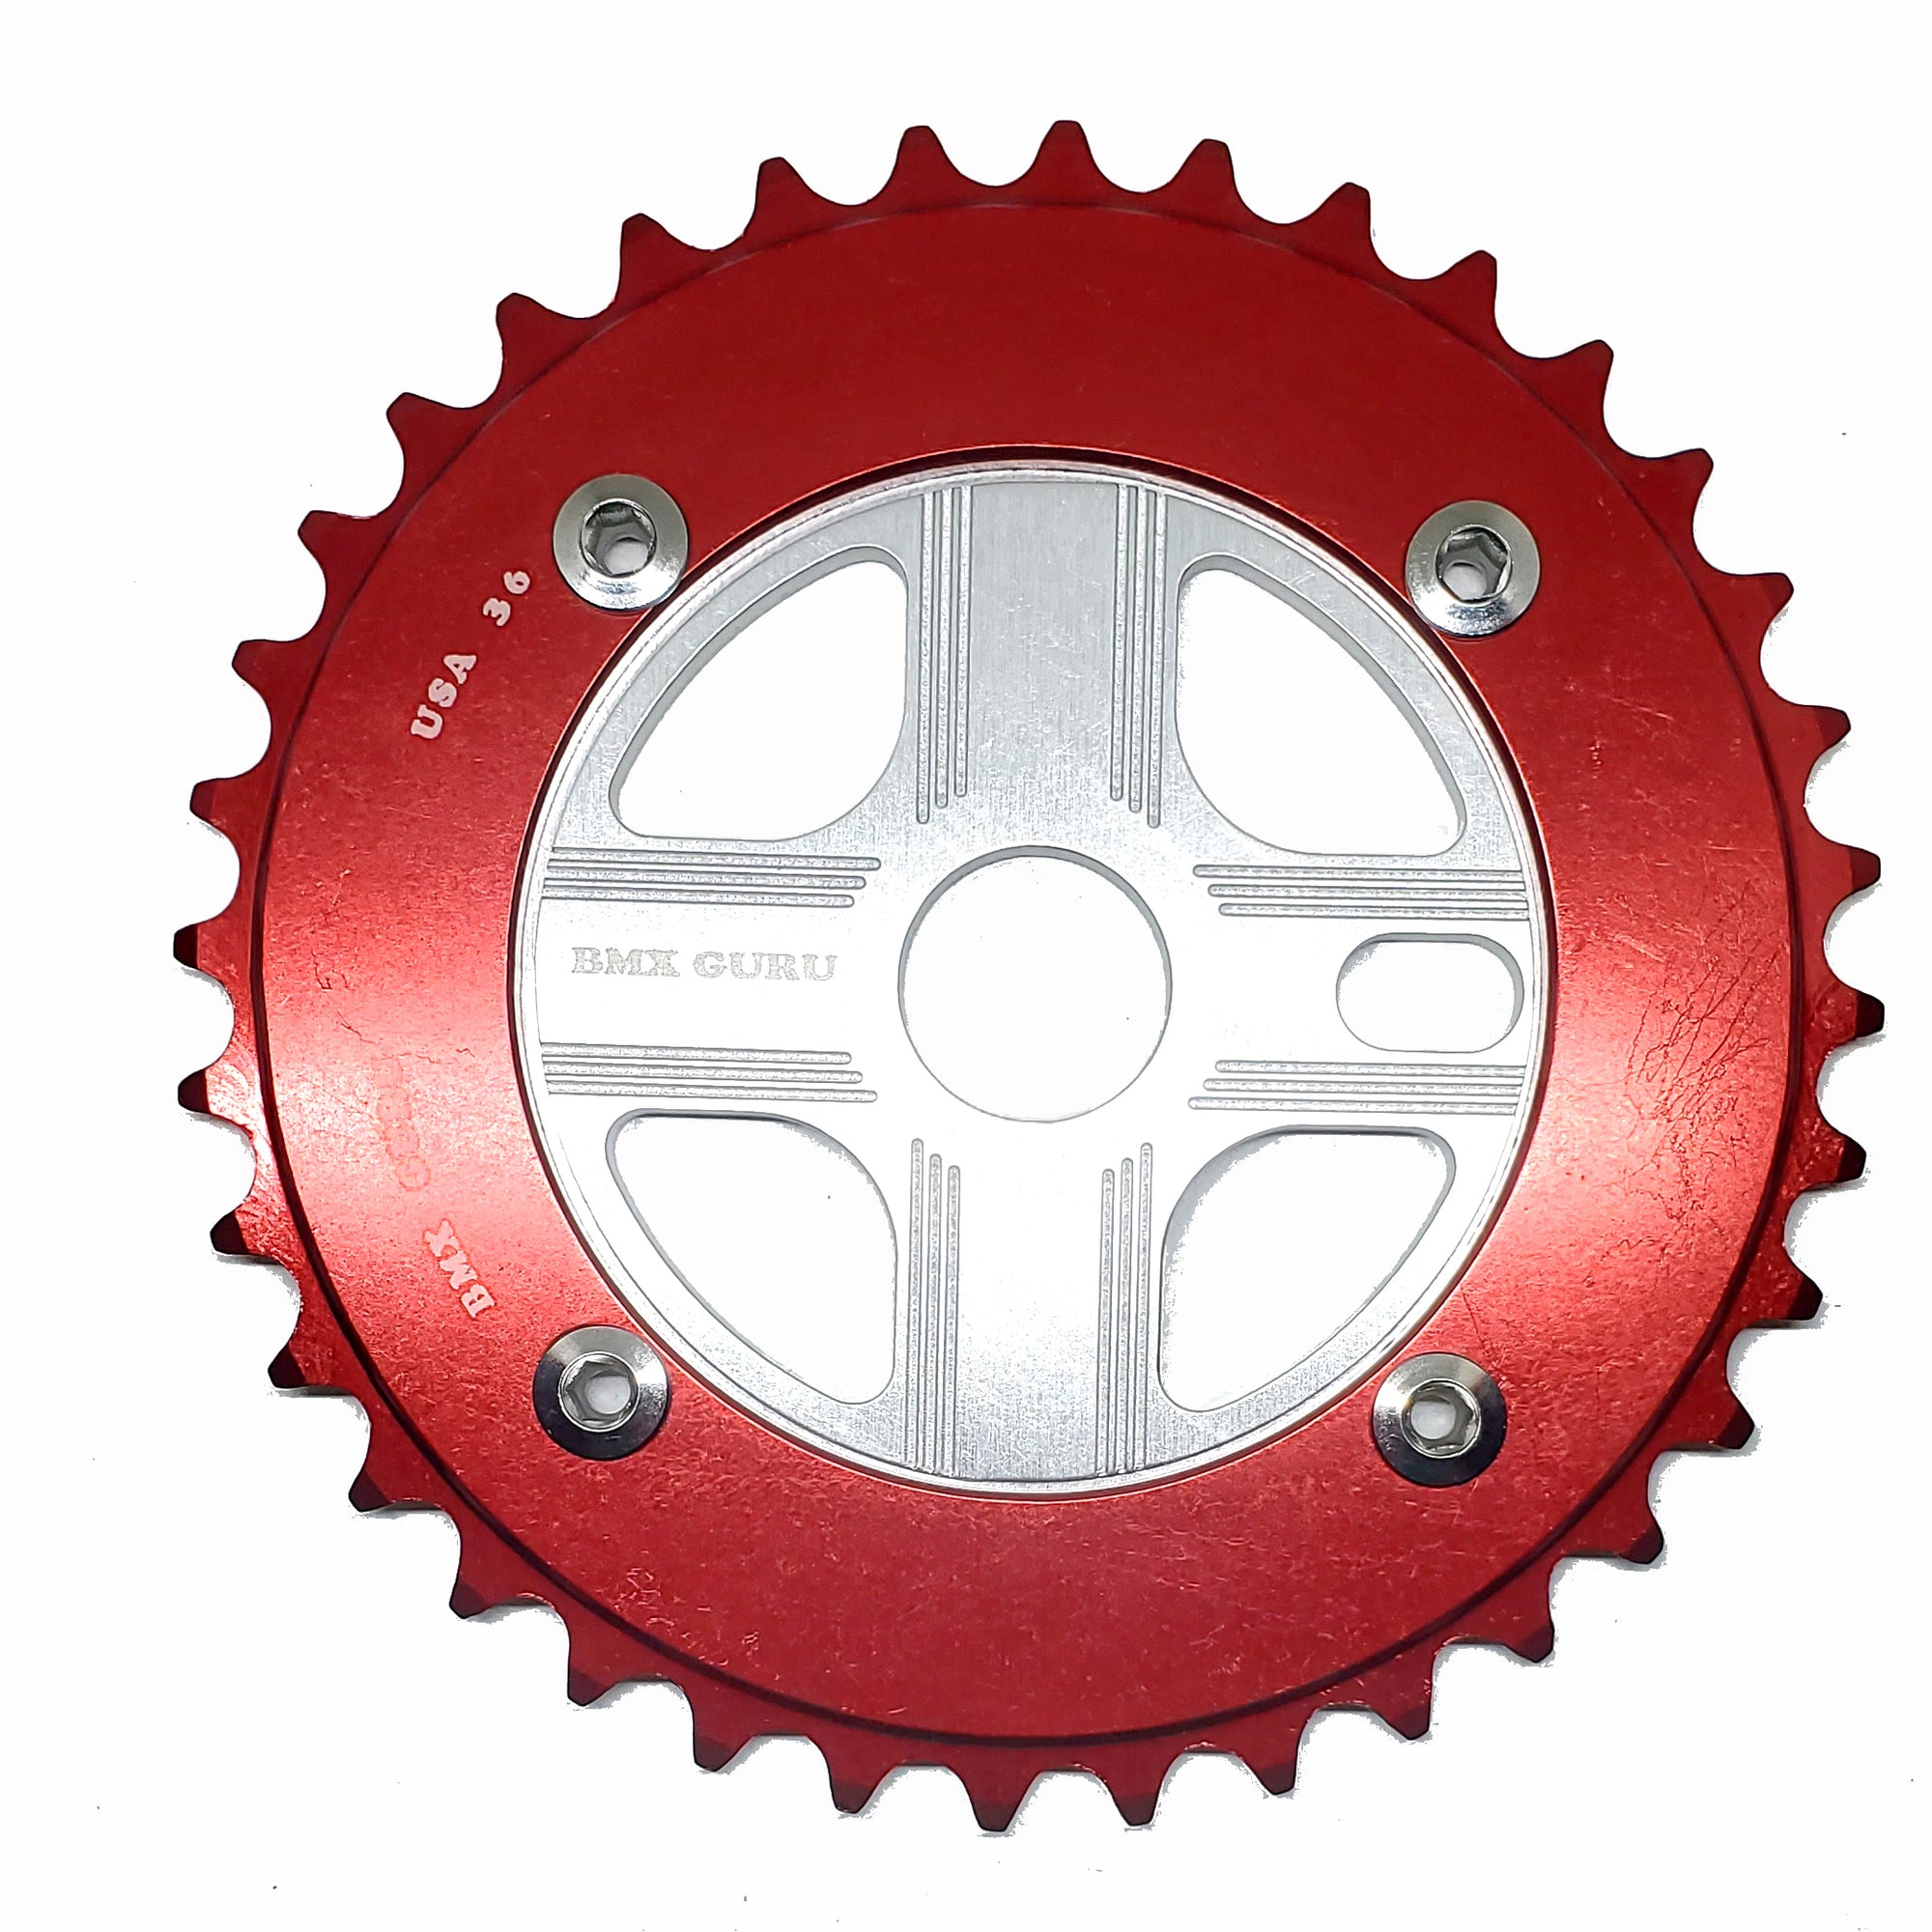 BMXGuru 36T Aluminum Spider & 4-bolt Chainring Combo - Red over Silver - USA Made